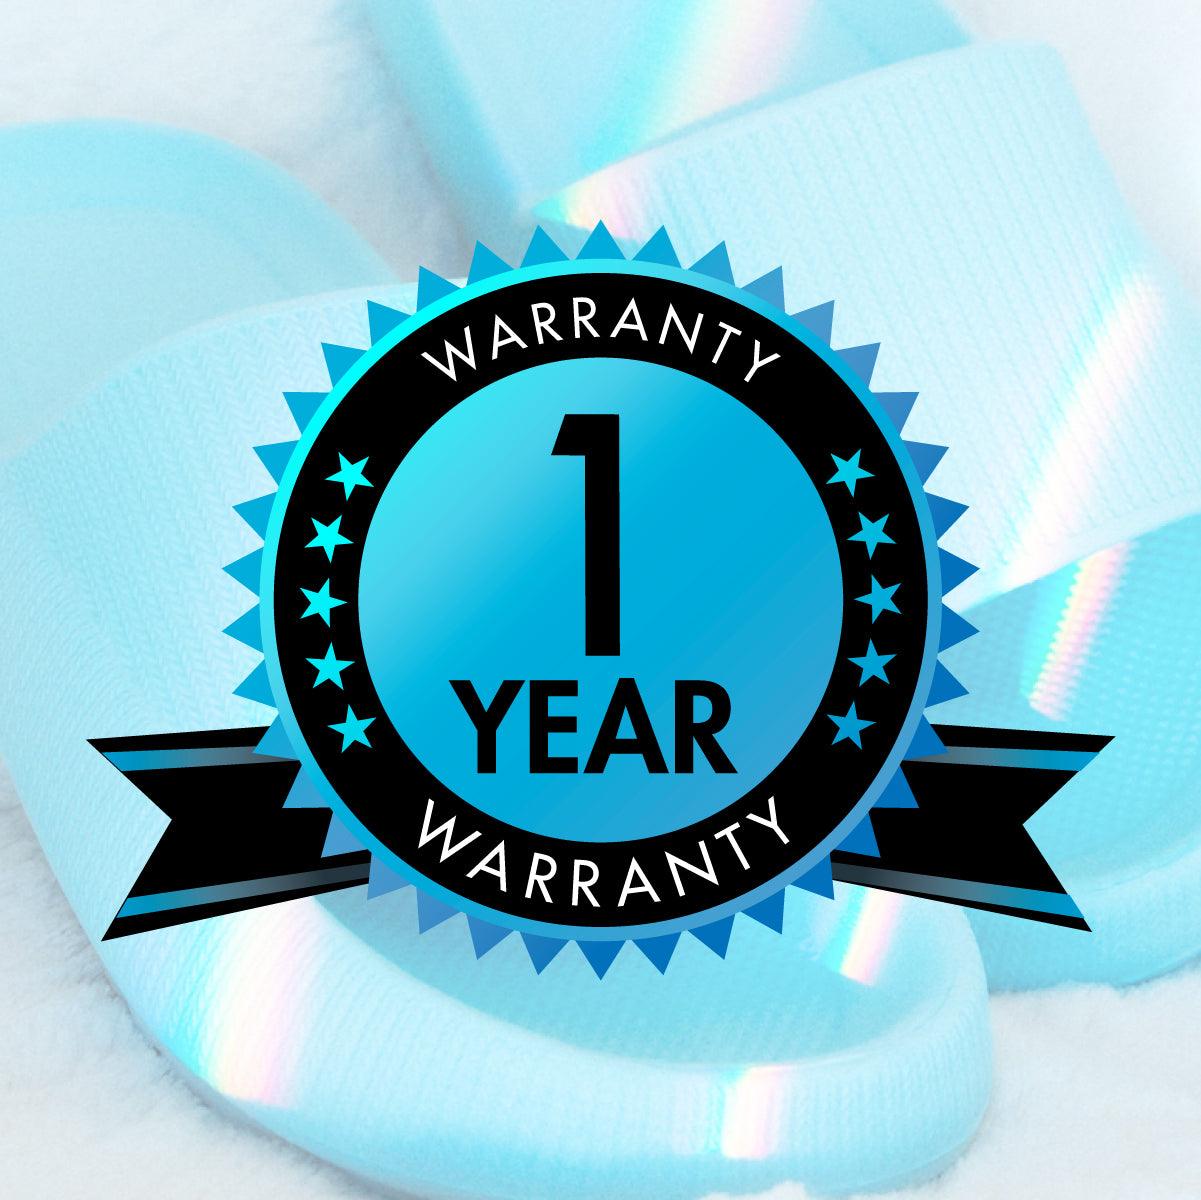 1 Year Warranty - Applies To One Pair